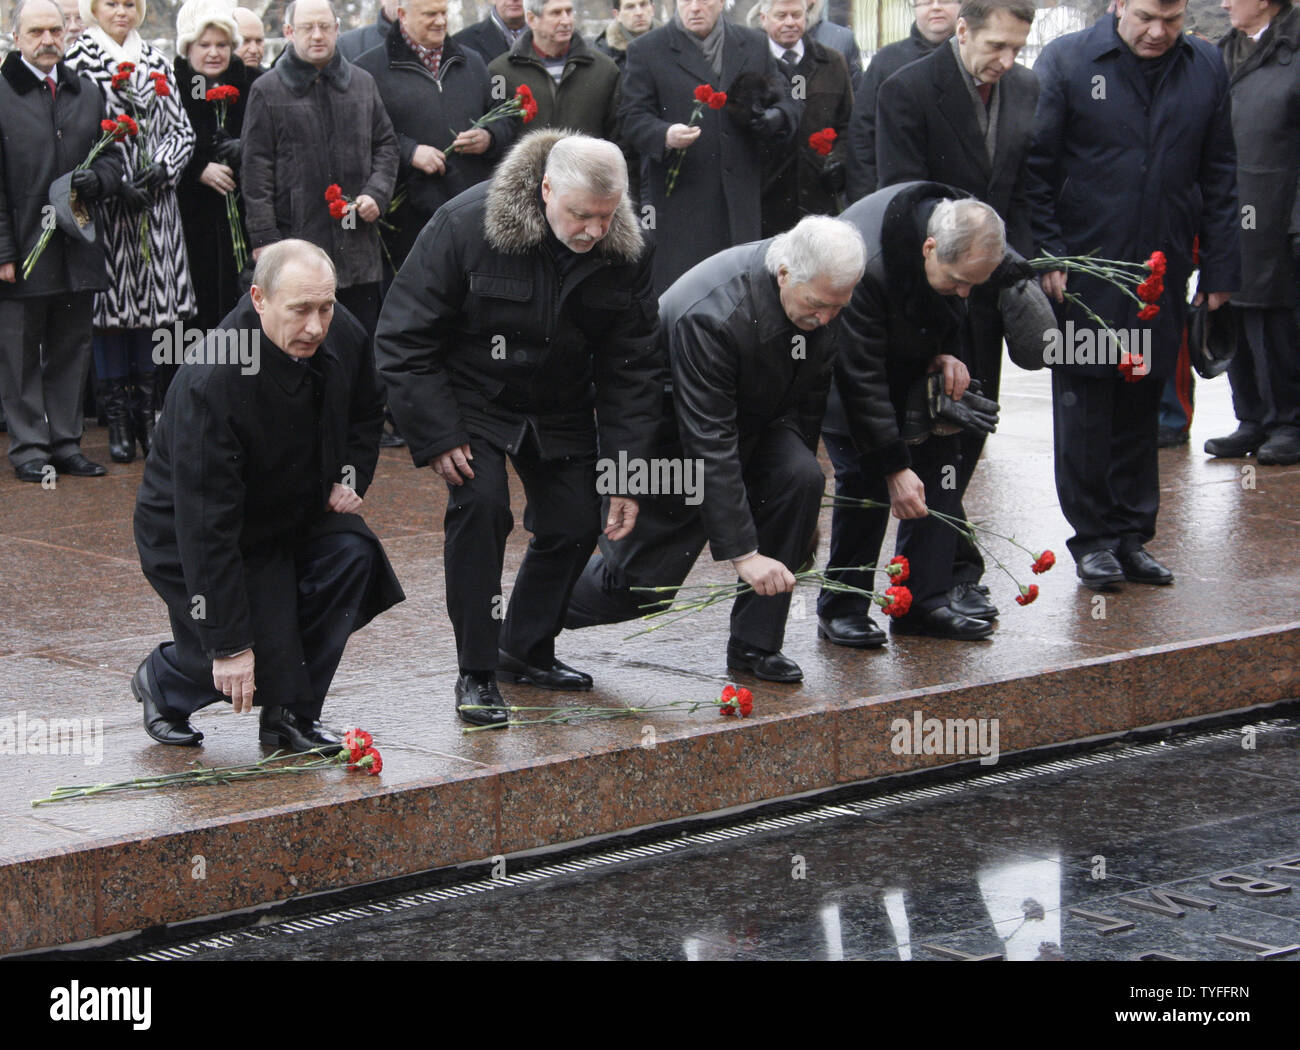 (L-R) Russian Prime Minister Vladimir Putin, Federation Council speaker Sergei Mironov, Parliament speaker  Boris Gryzlov and the Constitutional Court chairman Valery Zorkin take part in the ceremony to light the eternal flame at the Tomb of the Unknown Soldier outside the Kremlin in Moscow on February 23, 2010. The eternal flame was temporarily moved for three months during constructions of the Tomb of the Unknown Soldier and relighted today to to mark the Defender of the Fatherland Day in Russia. UPI/Alexander Natin Stock Photo